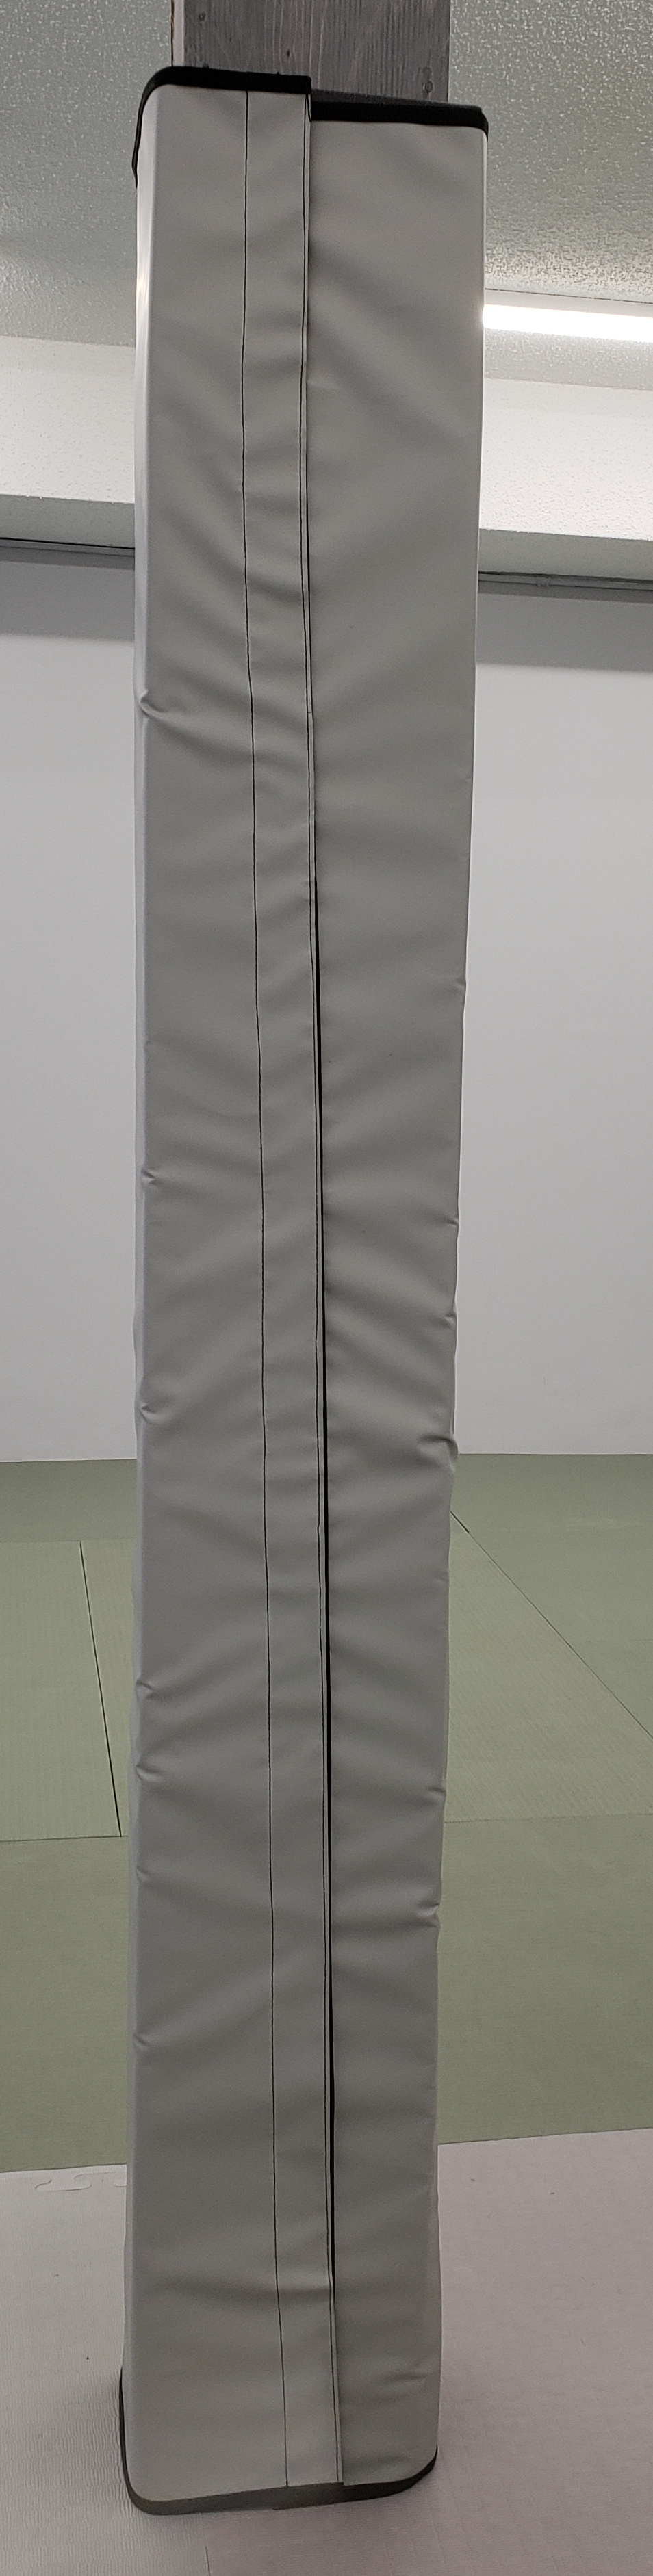 Padded Concrete Pole Cover